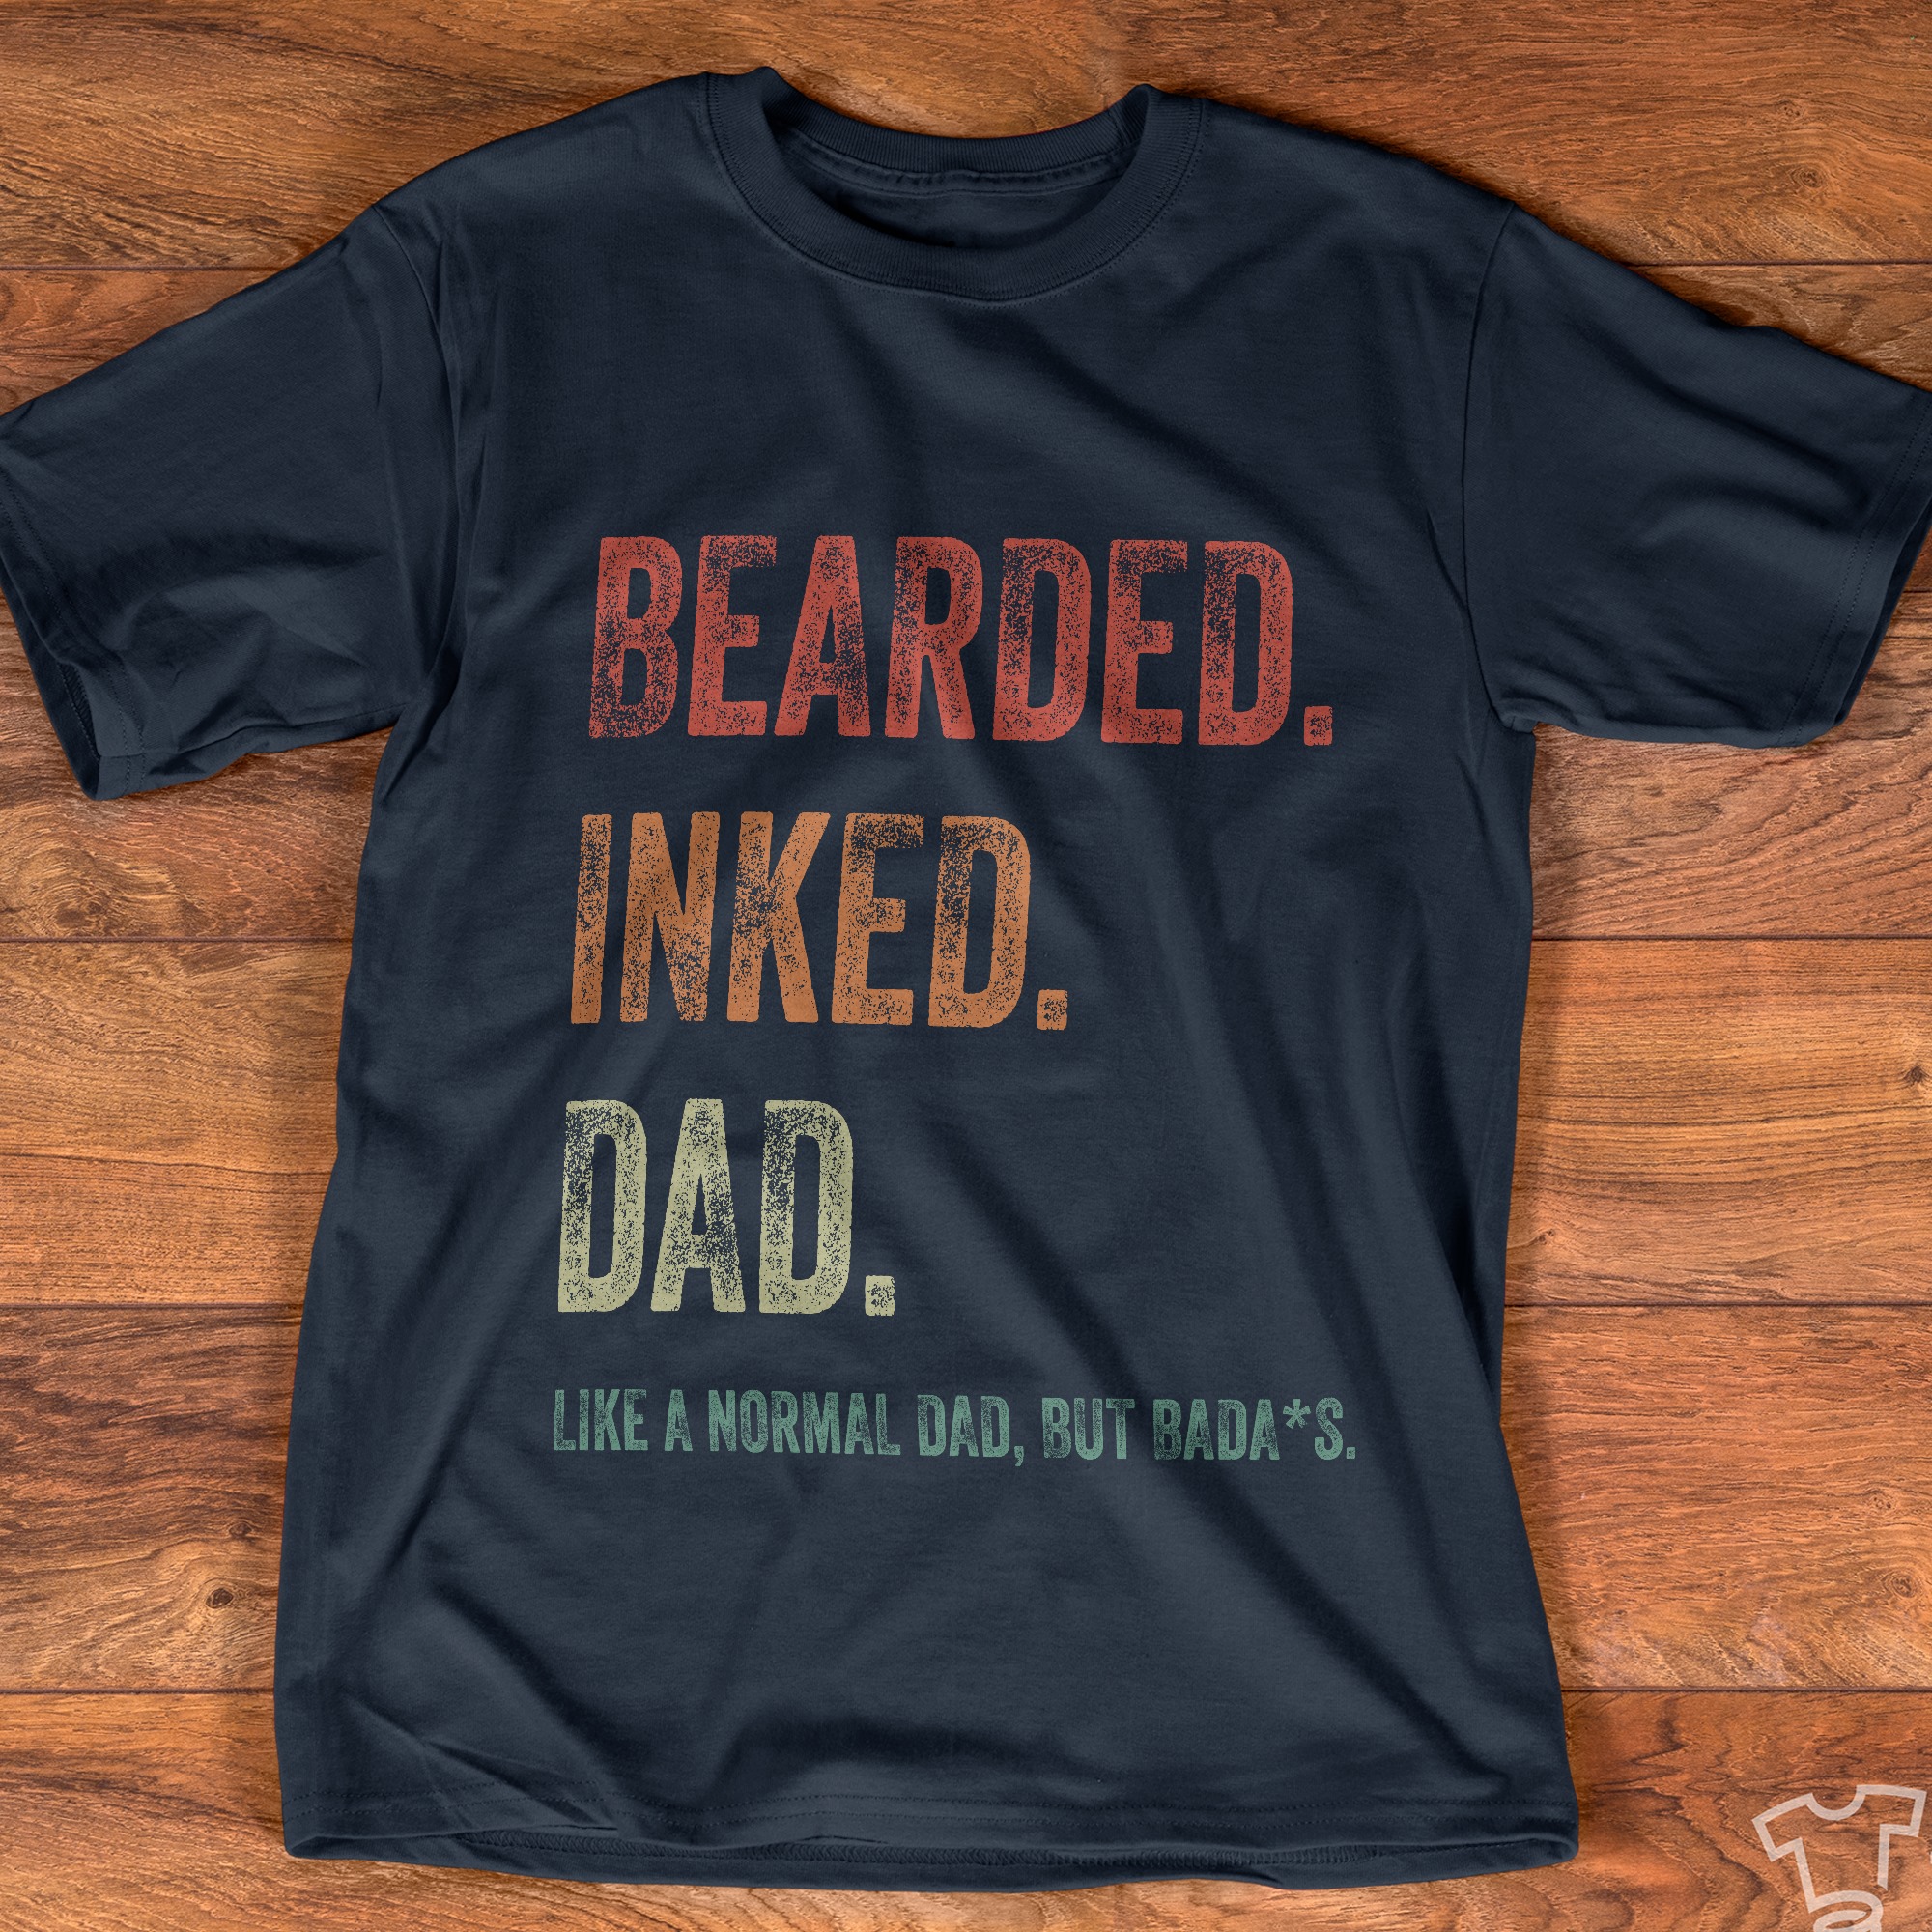 Bearded. inked. dad. like a normal dad but bada*s